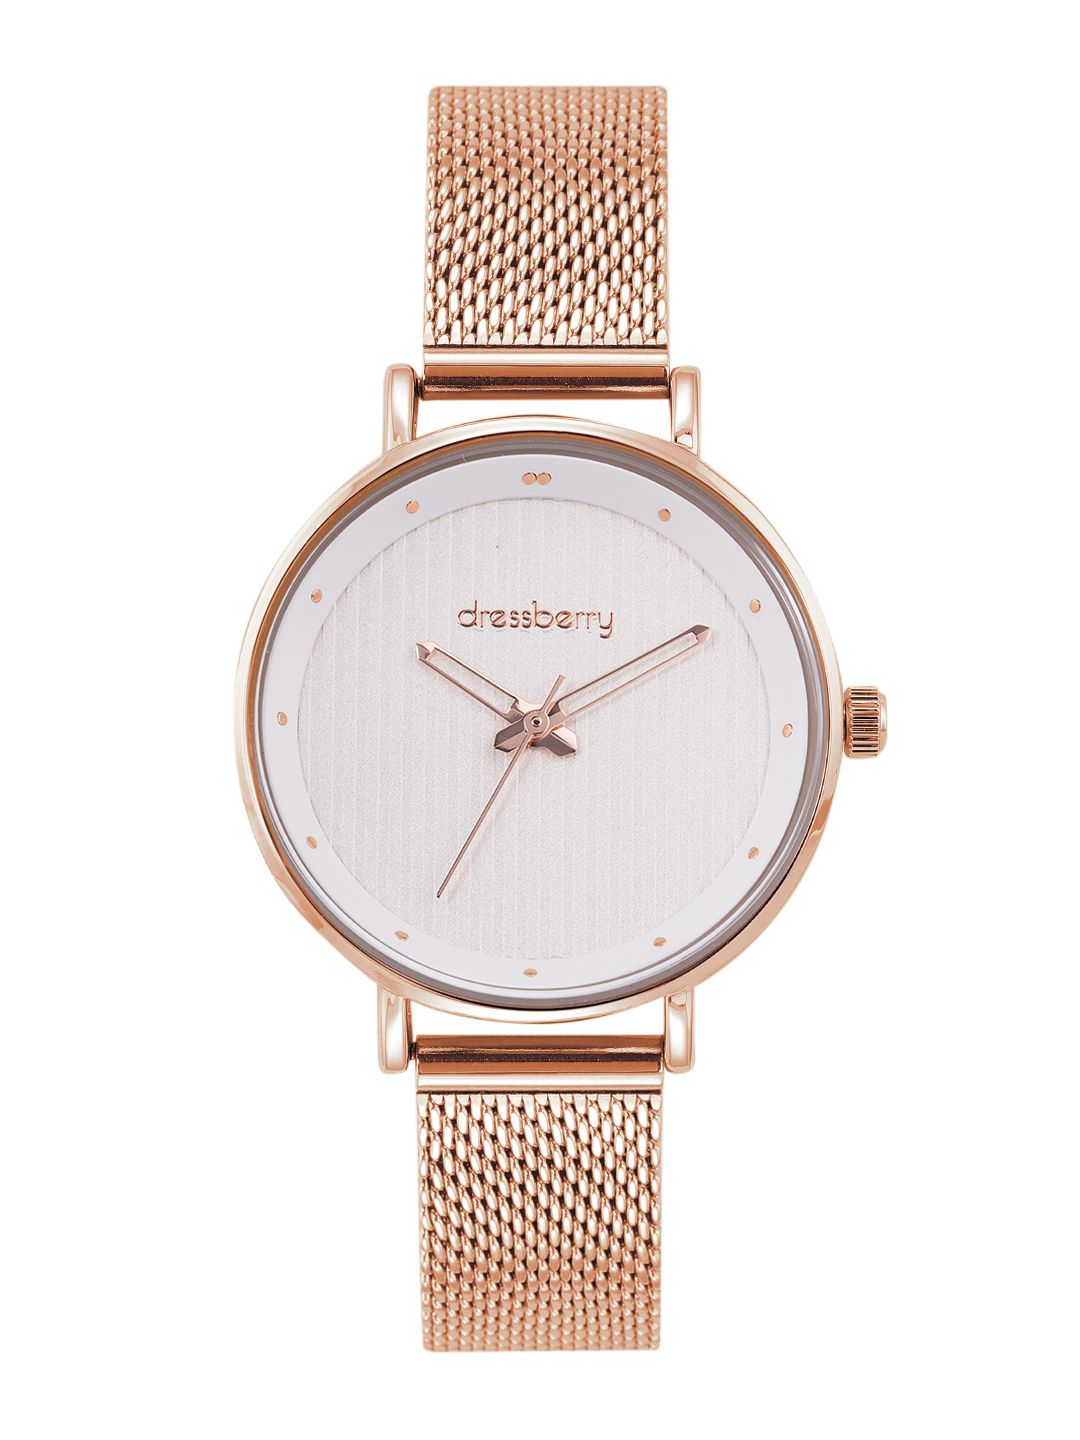 DressBerry Women Silver-Toned Analogue Watch MFB-PN-CHR-S2172 Price in India